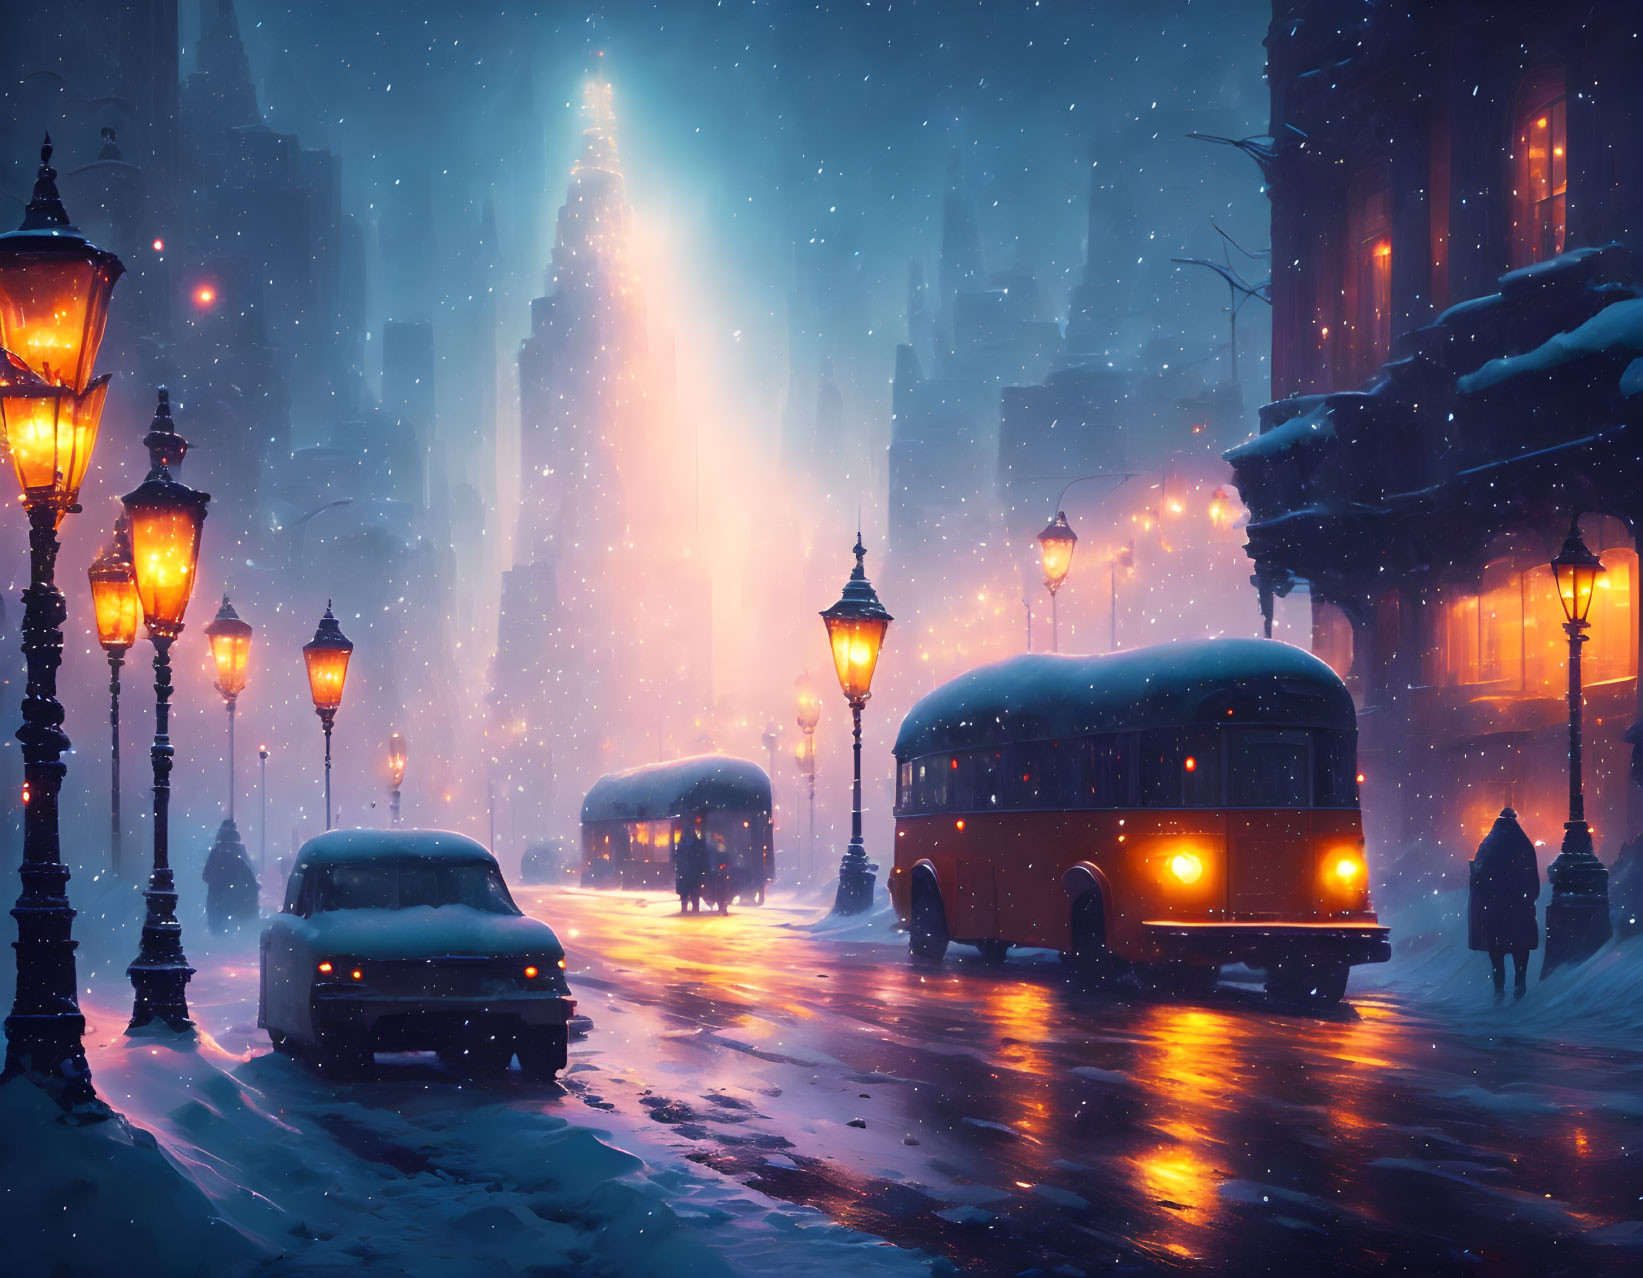 Snowy Cityscape Night Scene with Vintage Bus & Glistening Streets